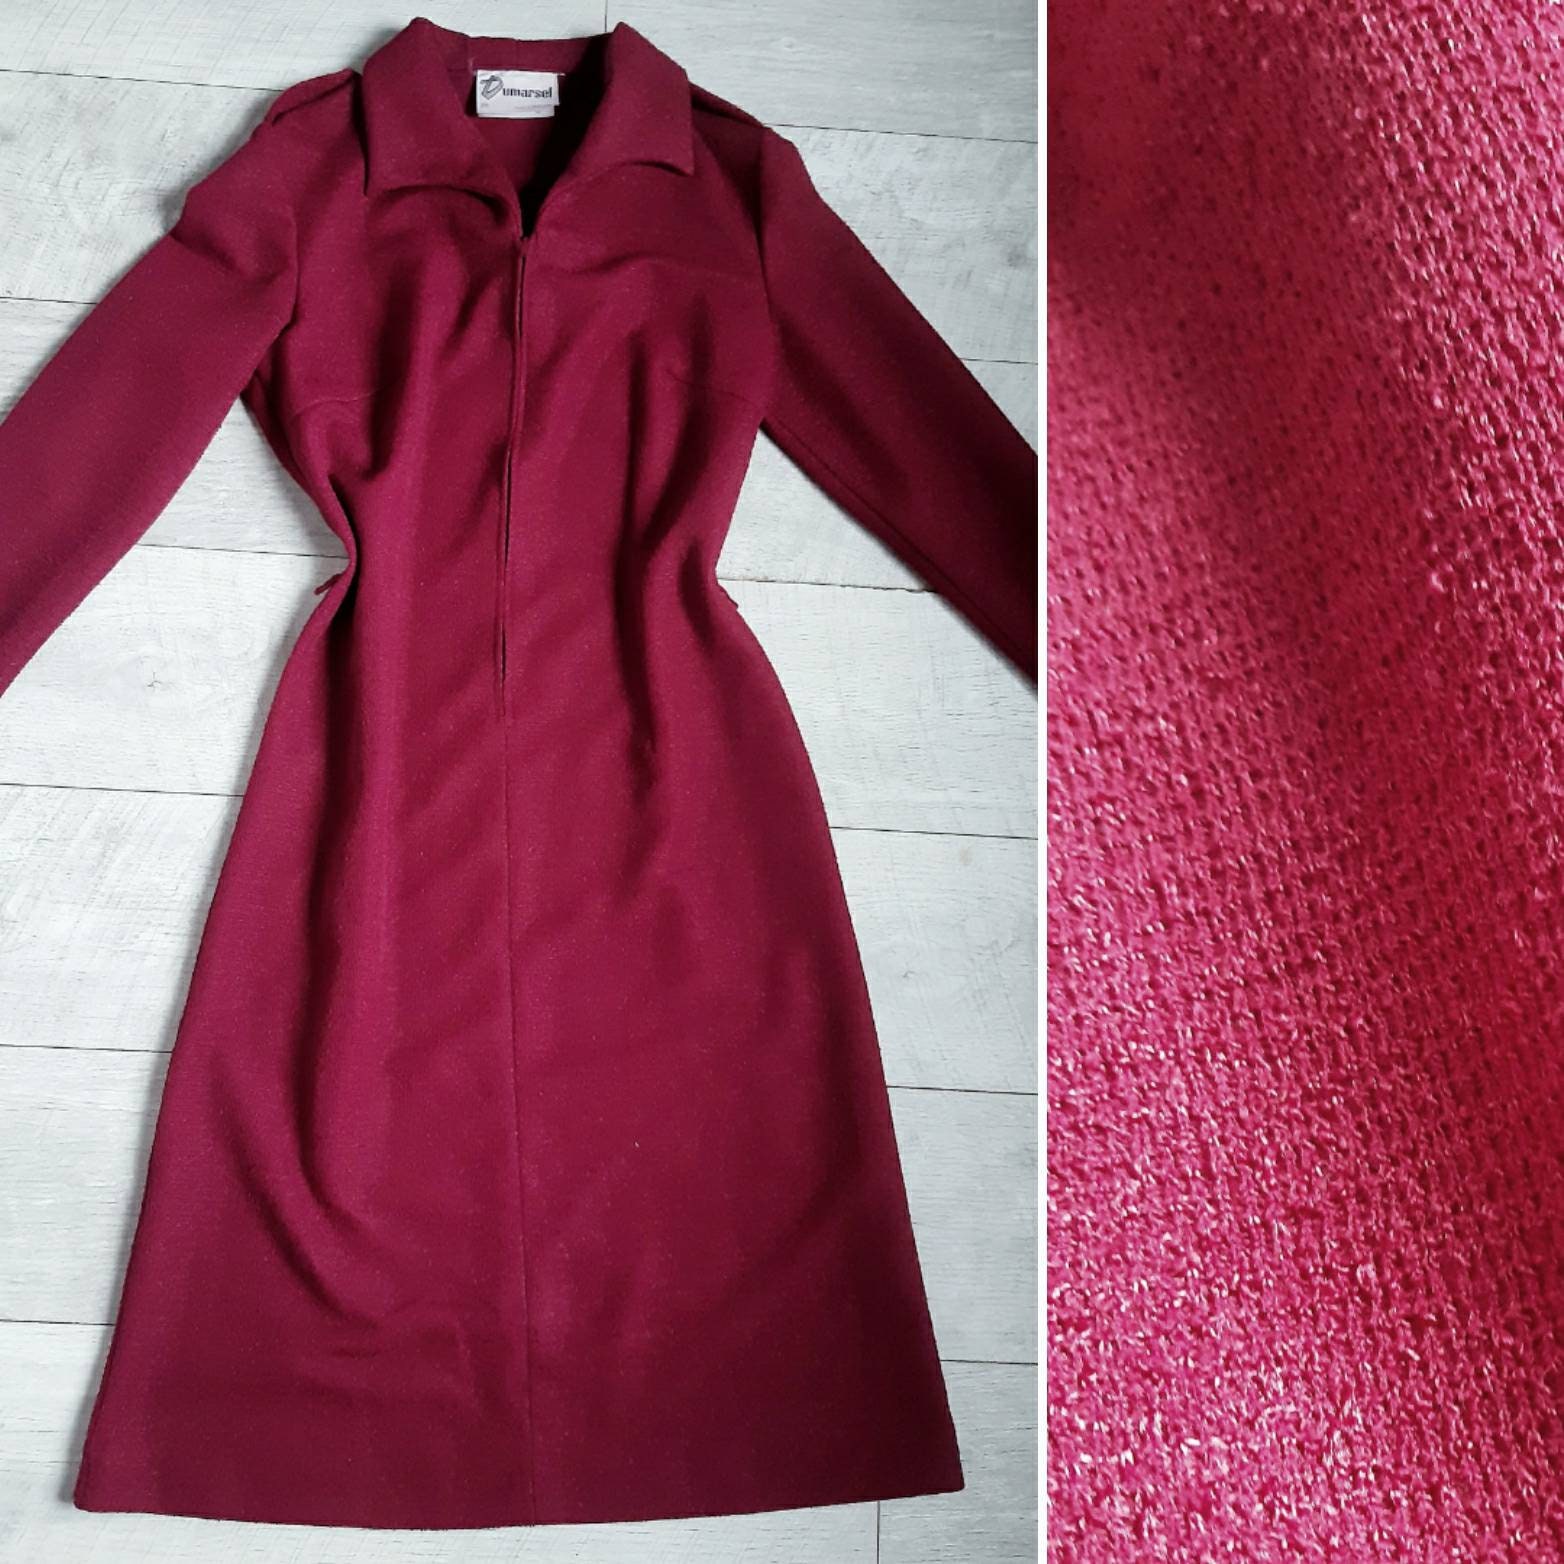 Groovy 1970s Vintage Zip up Wine Red Day Dress. Collared Retro - Etsy UK